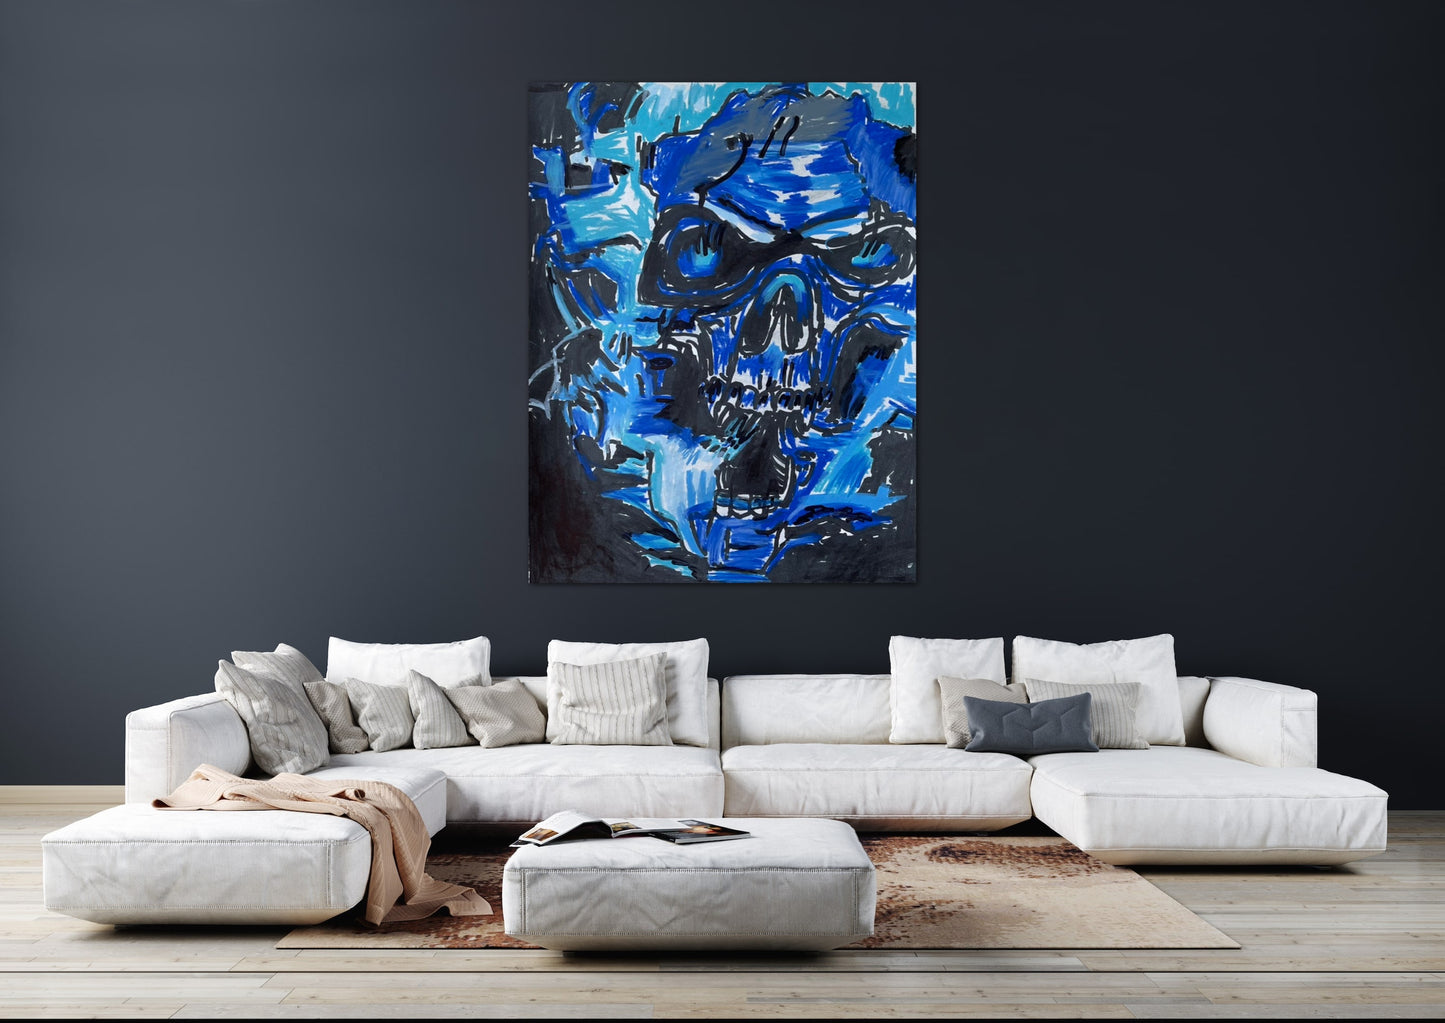 Skull - Stretched Canvas Print in more sizes